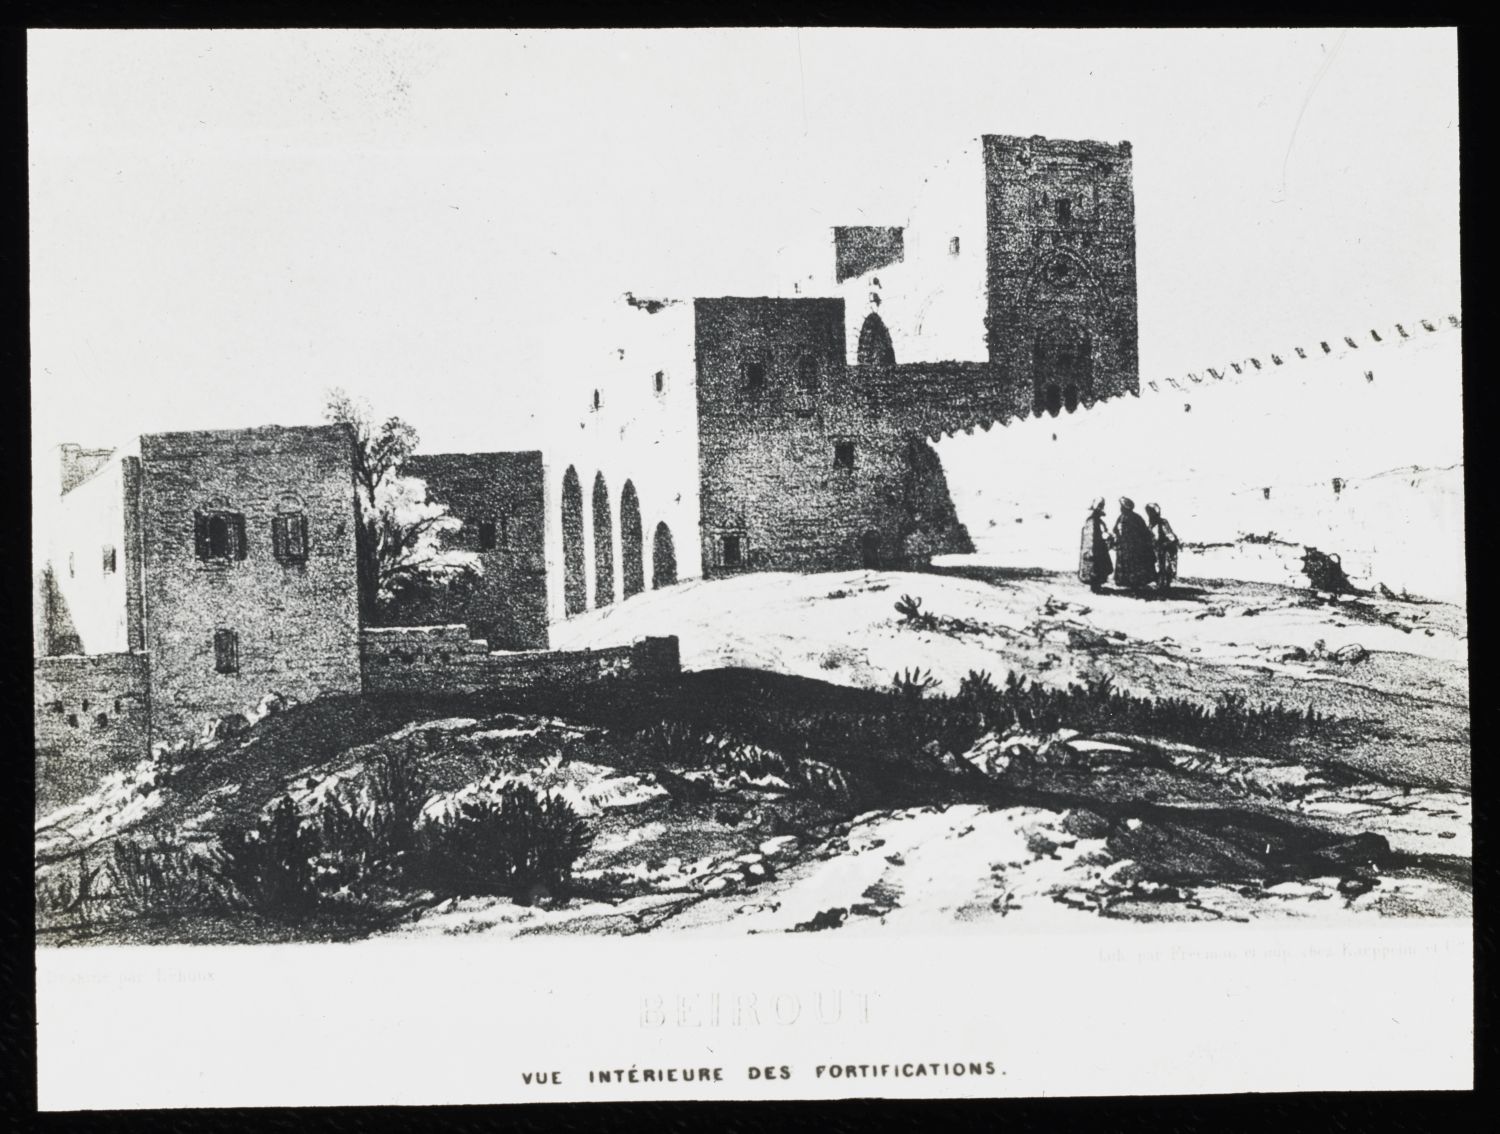 Beirout. Vue Intérieure des Fortifications. [Beirut: engraving from 19th century showing interior view of fortifications.]<p class="MsoNormal"><o:p></o:p></p>